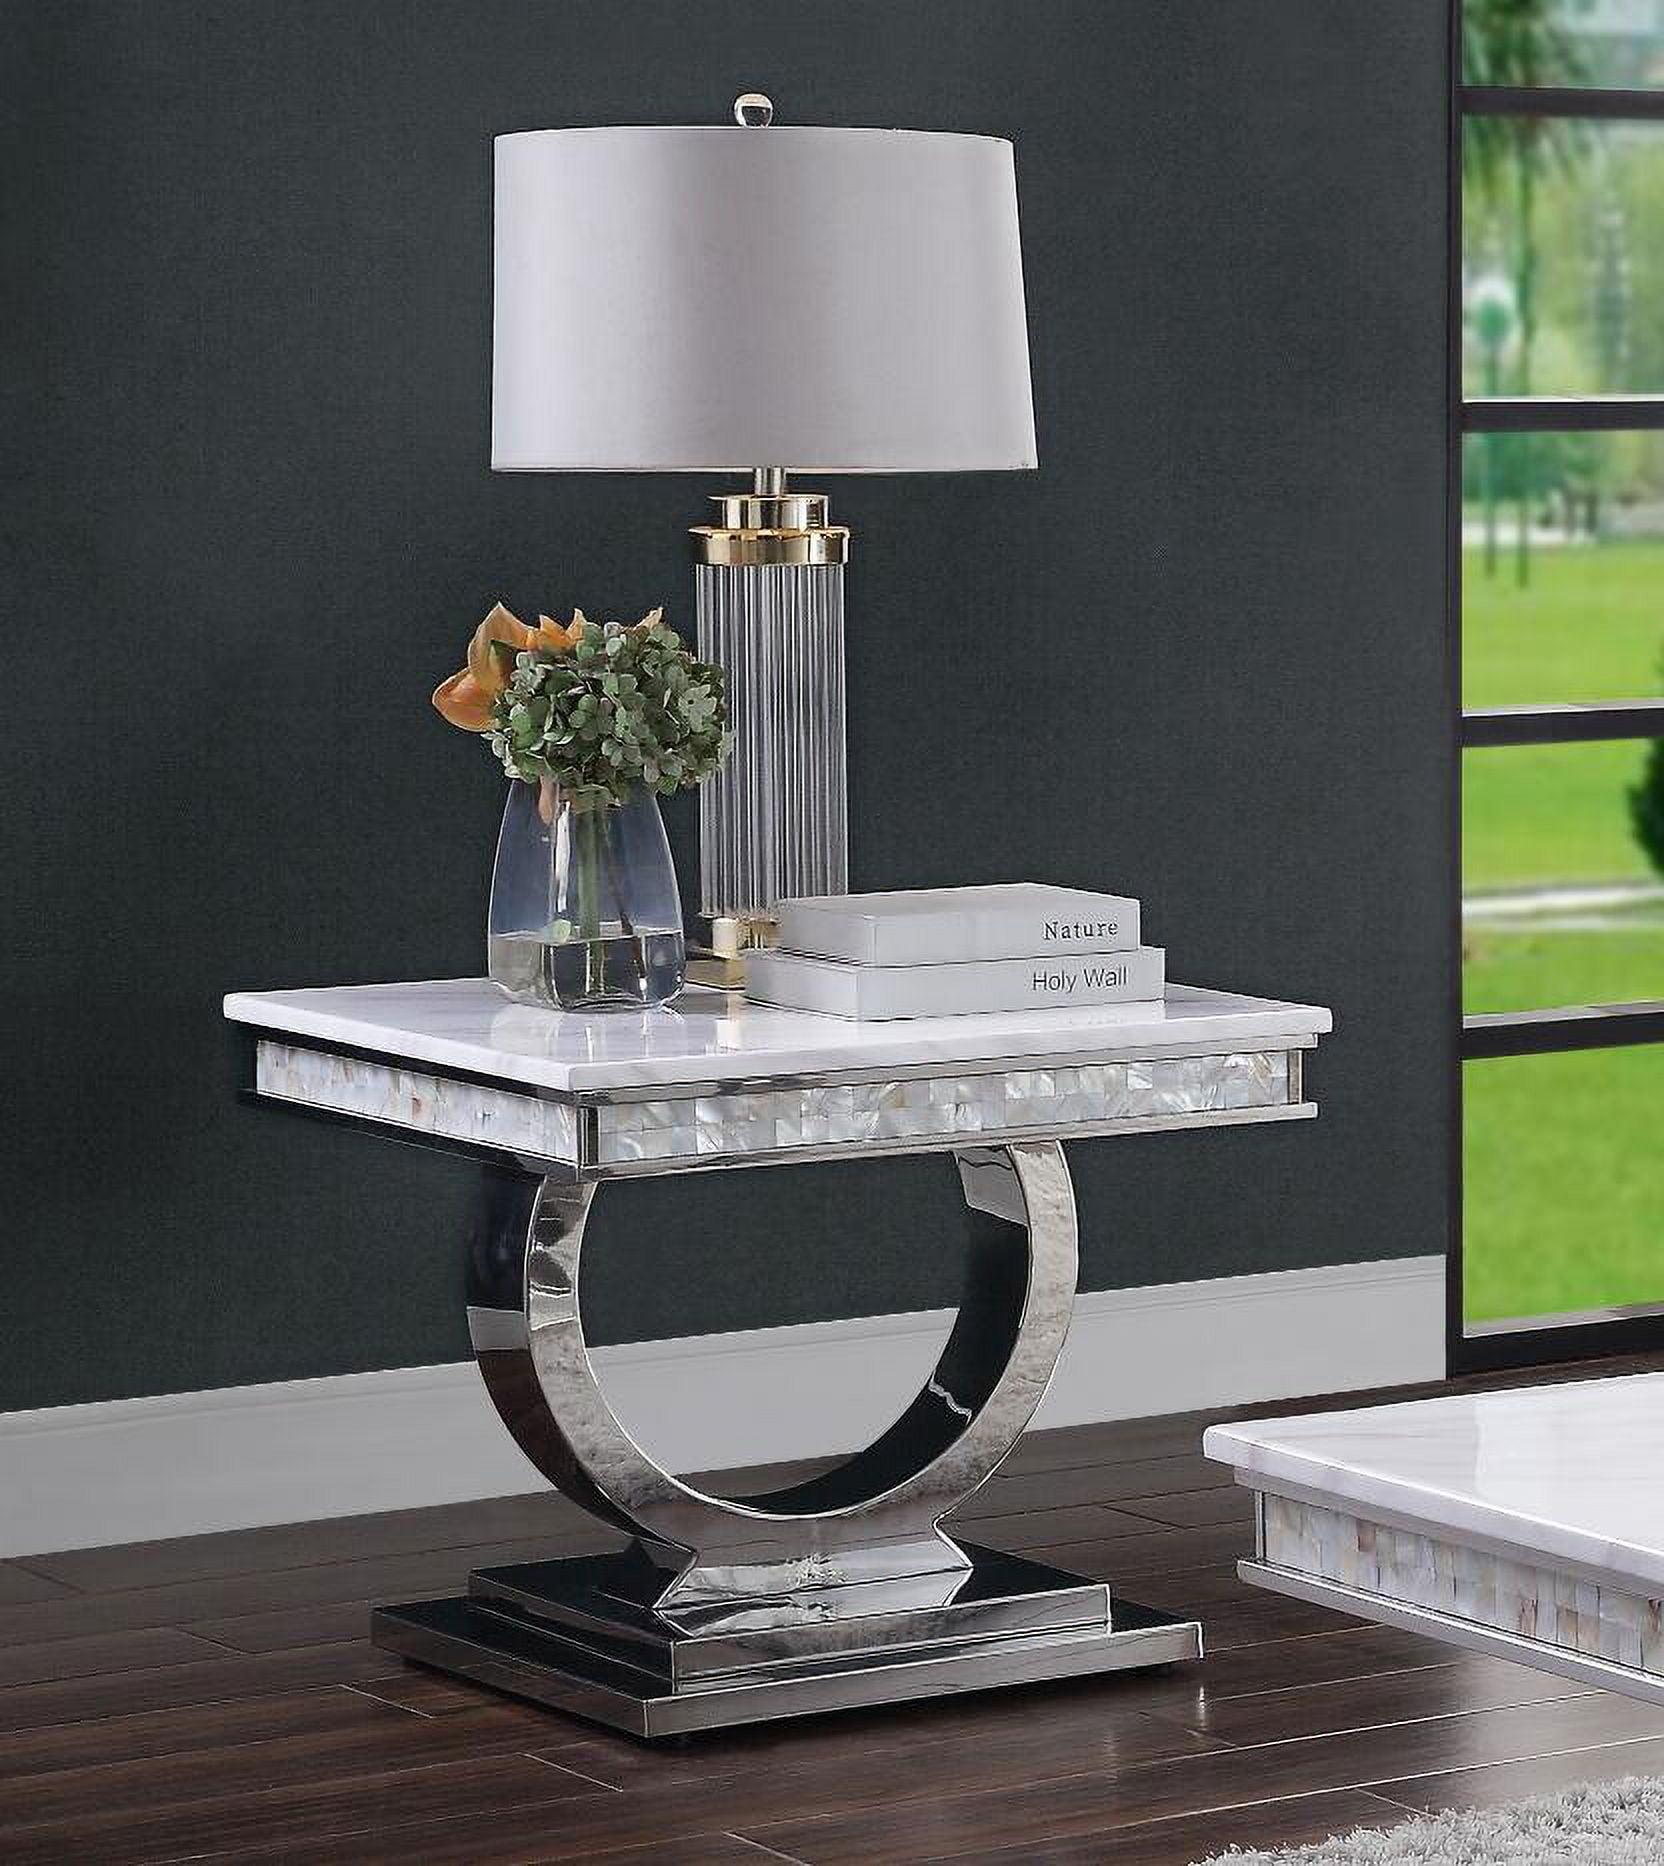 65'' Zander Modern Glamour Sofa Table with White Faux Marble and Mirrored Silver Finish